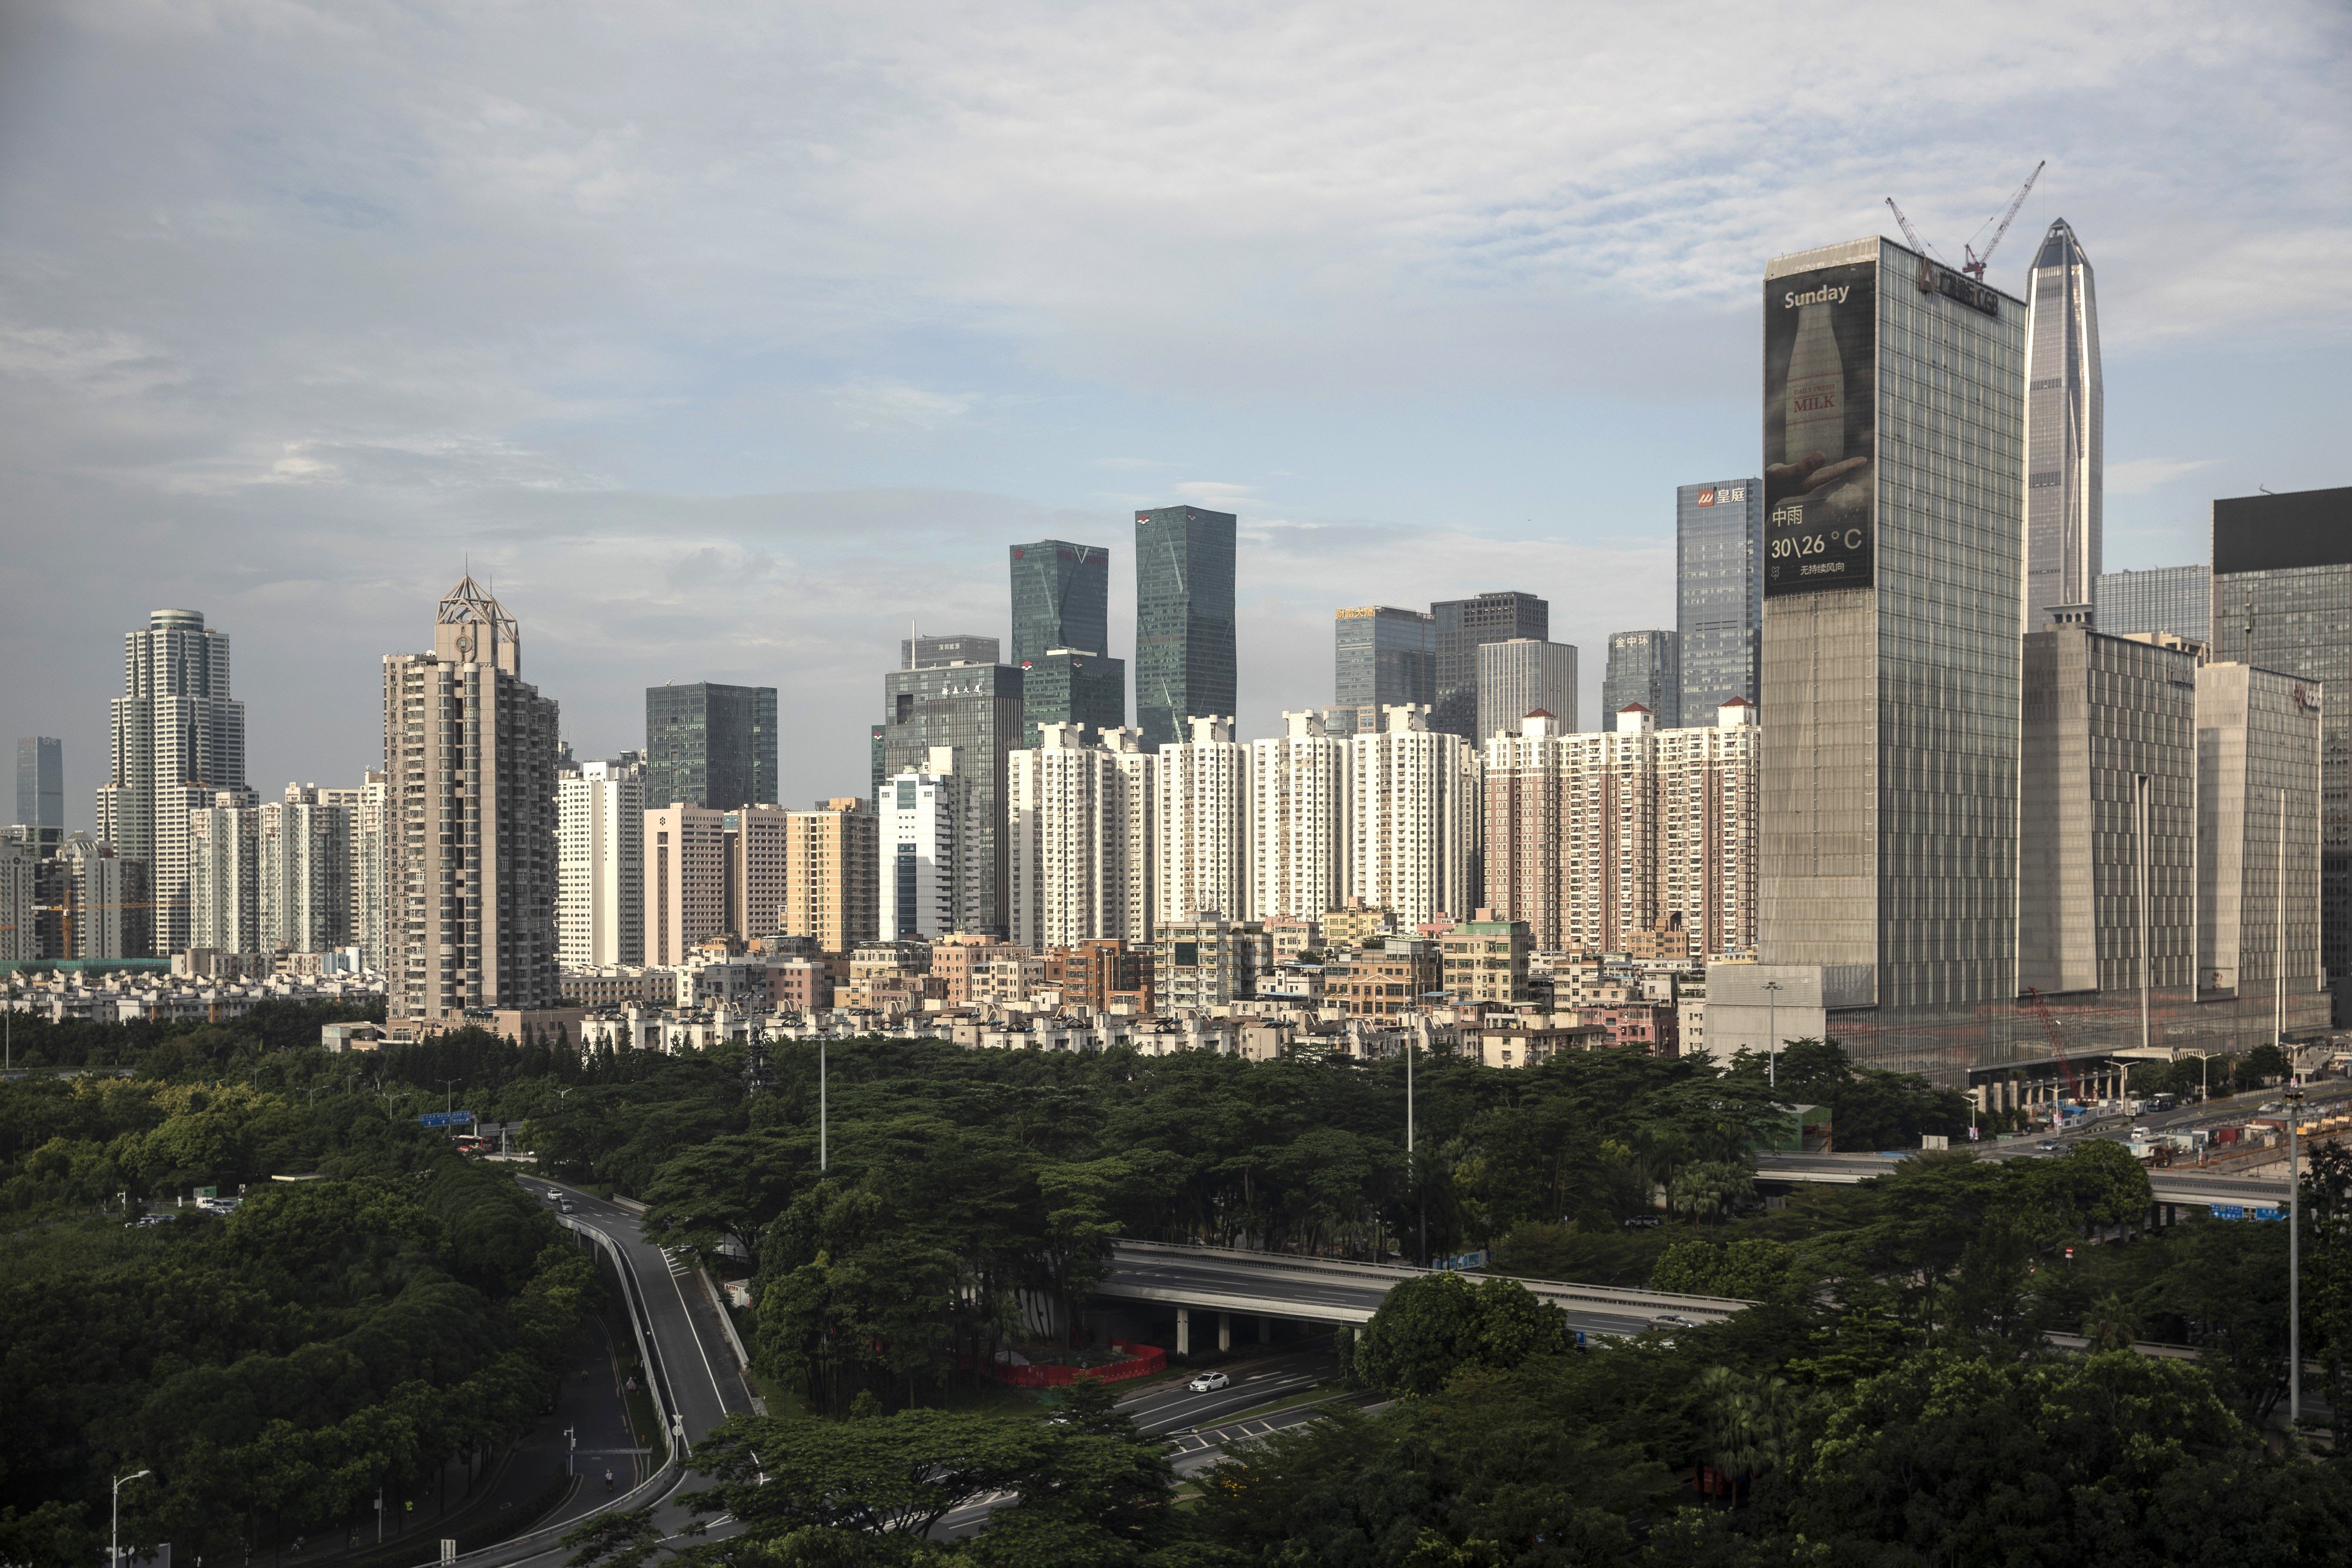 A view of Shenzhen on Sunday, August 4, 2019. China plans to let Shenzhen City, which borders Hong Kong, play “a key role” in science and technology innovation in the Guangdong-Hong Kong-Macau Greater Bay Area, according to state media. Photo: Bloomberg